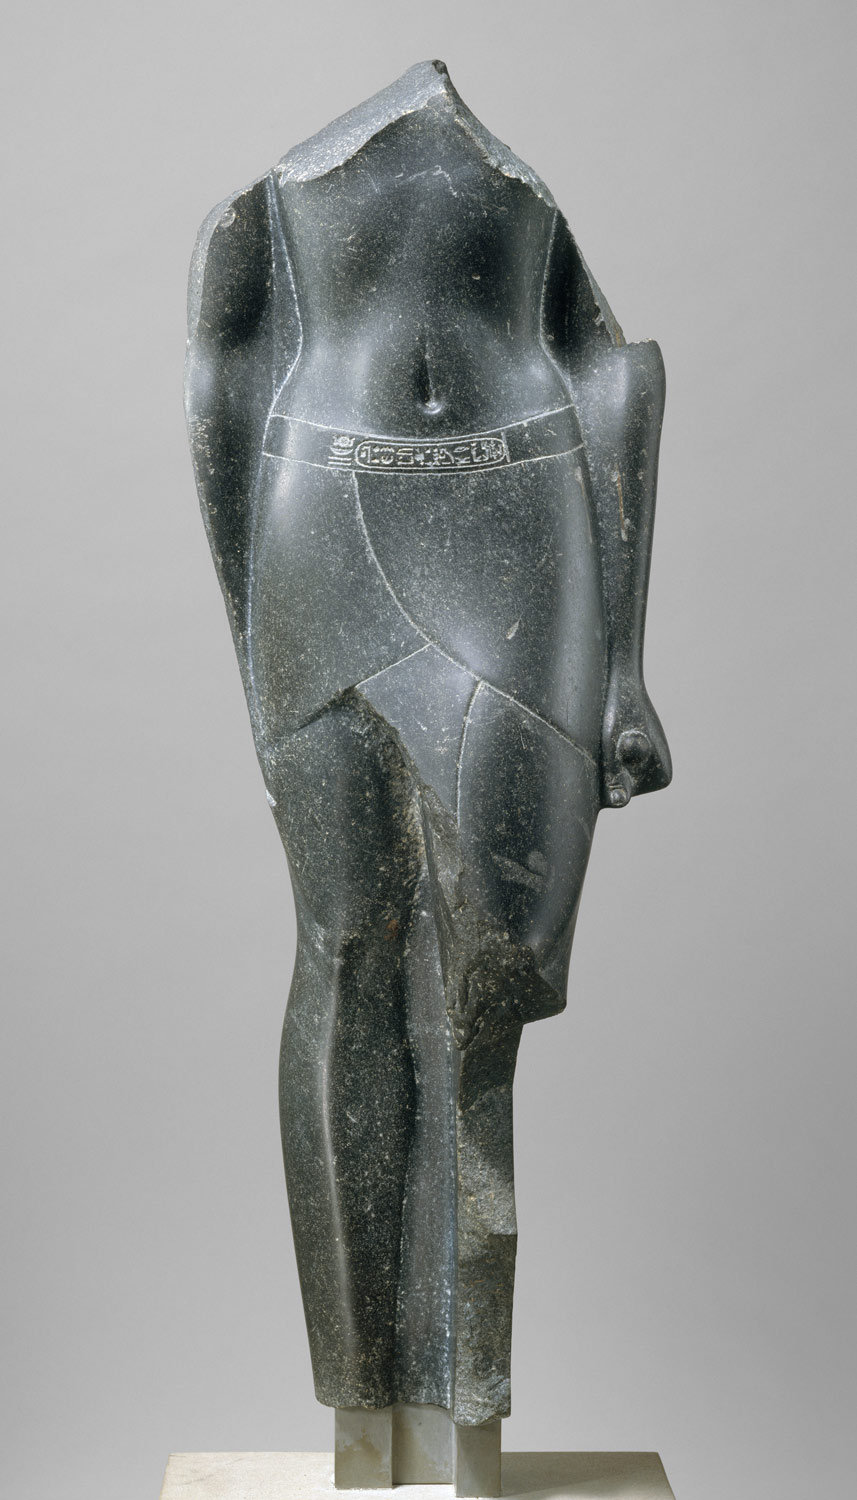 Torso of a Ptolemaic King, inscribed with cartouches of a late Ptolemy